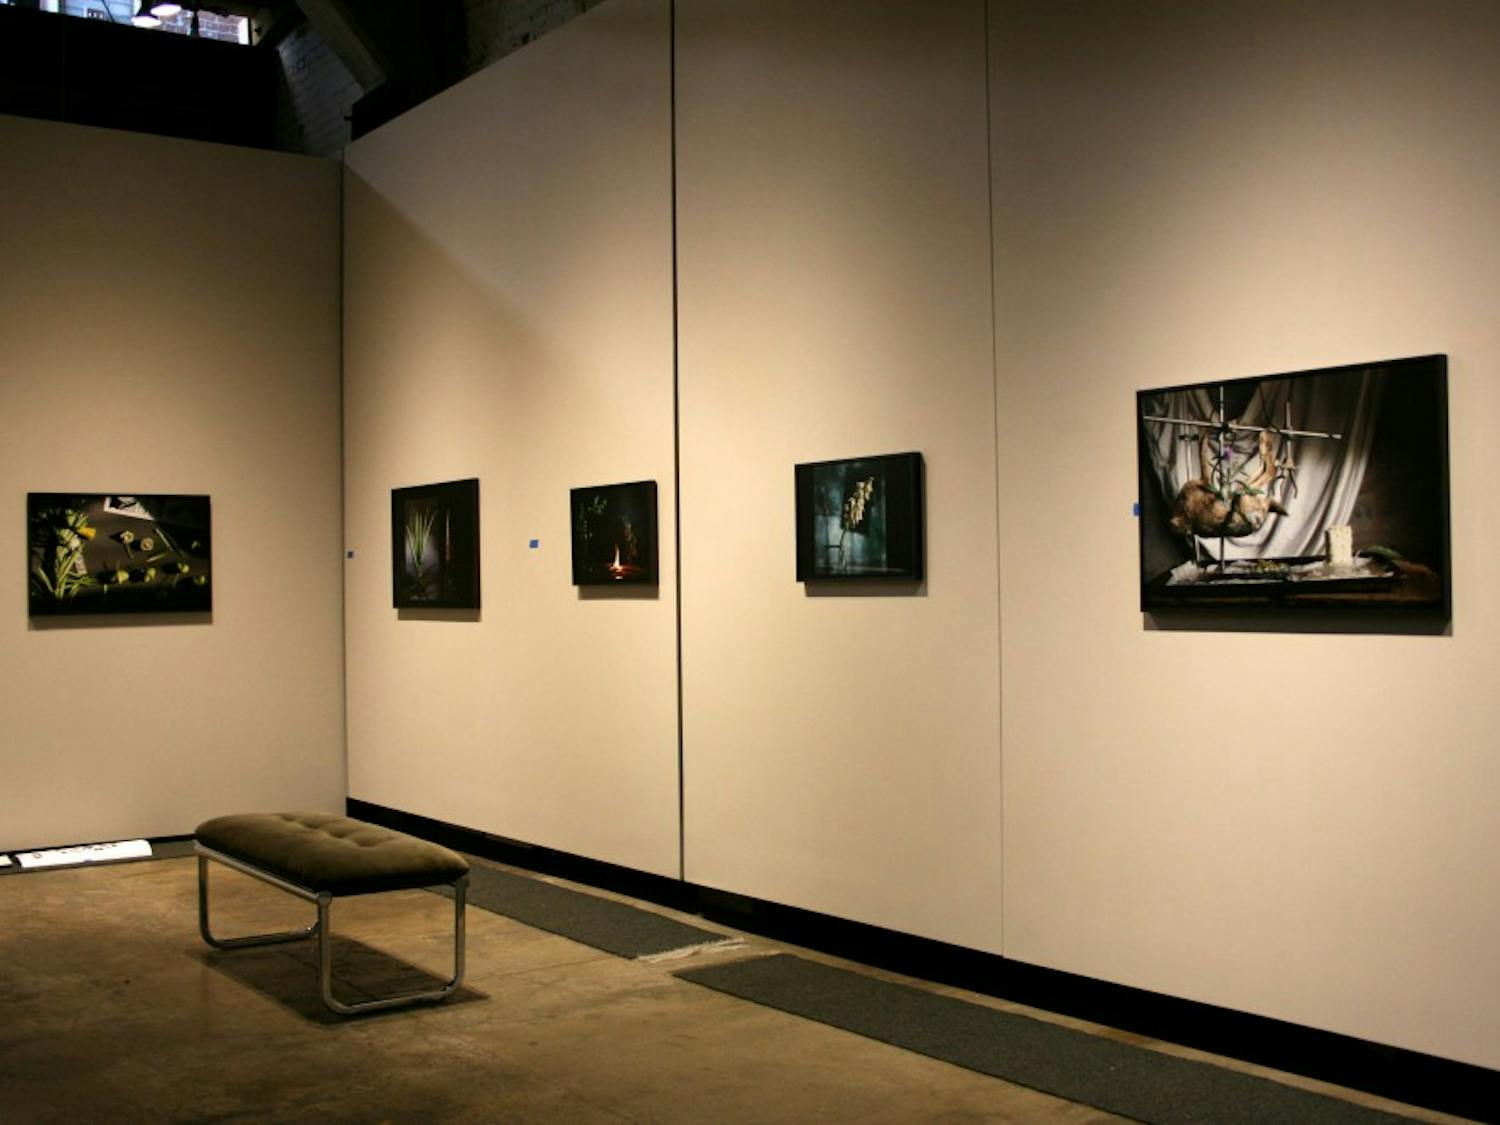 Still life photos, taken by ASU photography major&nbsp;Ryan Parra, are shown at the Northlight Gallery at 605 E. Grant St. in Phoenix on Wednesday,&nbsp;April 13, 2016.